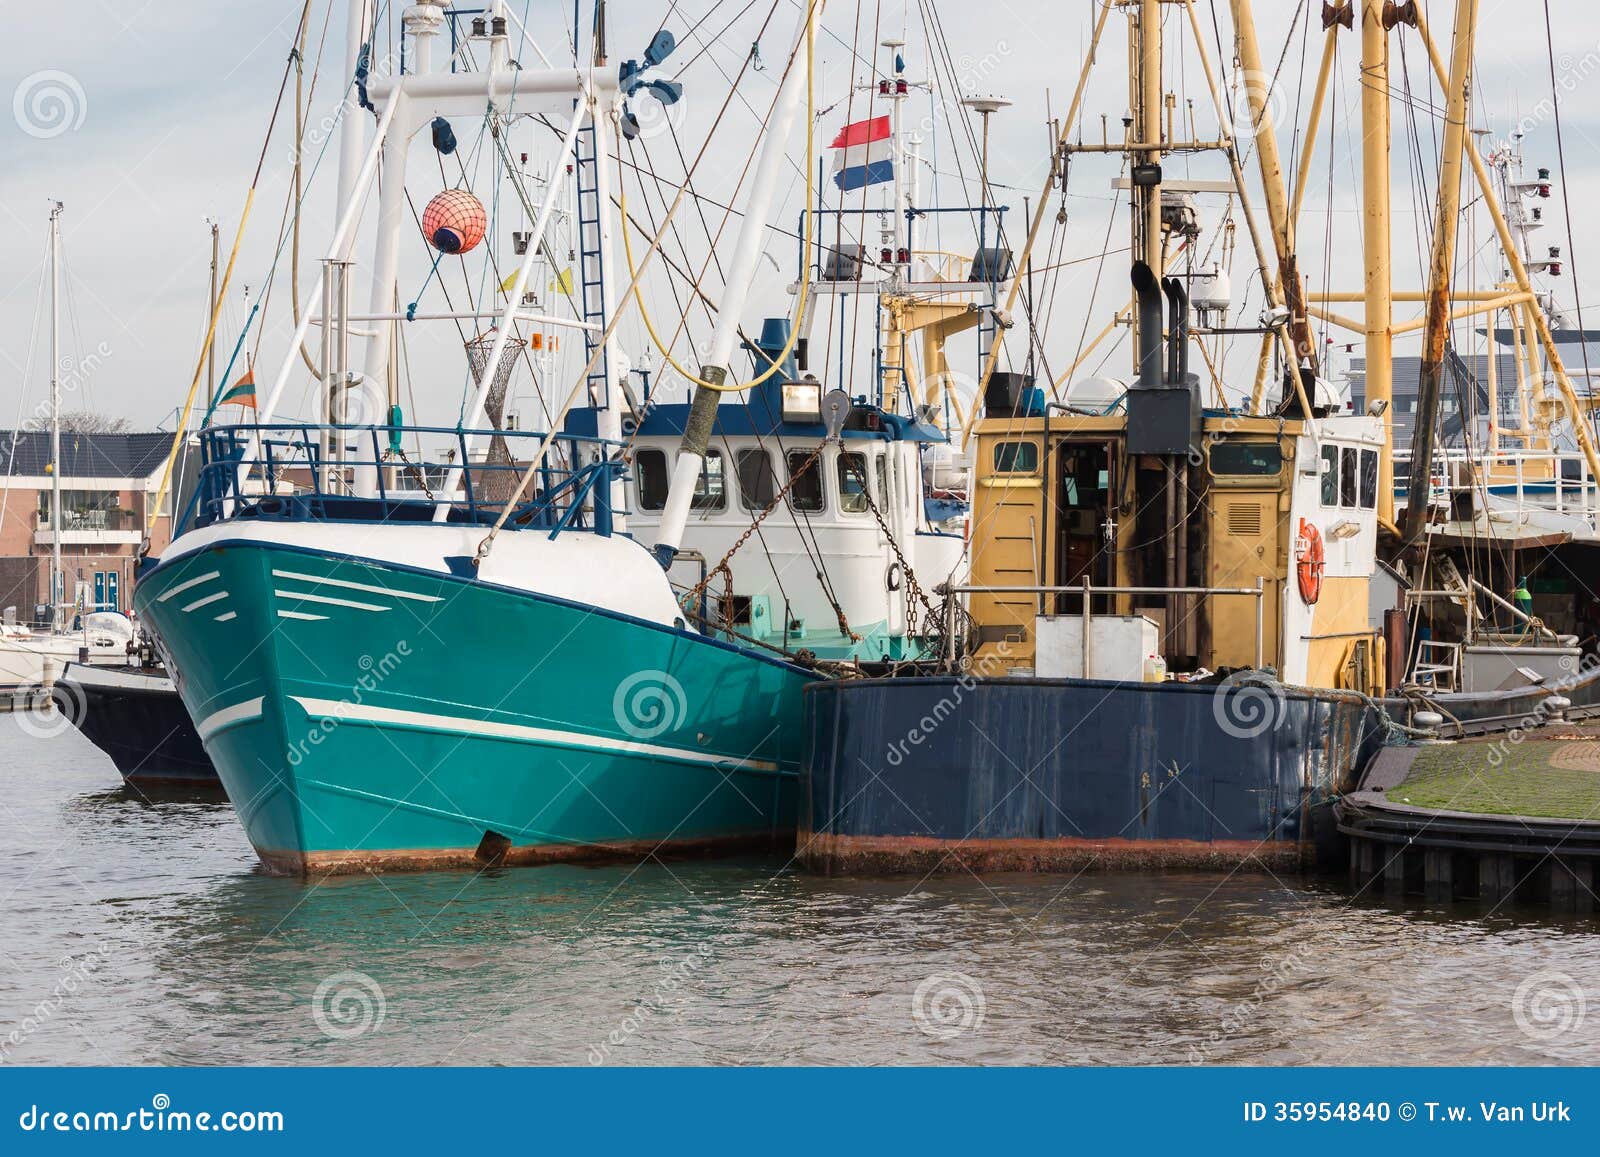 dutch harbor of urk with fishing cutters